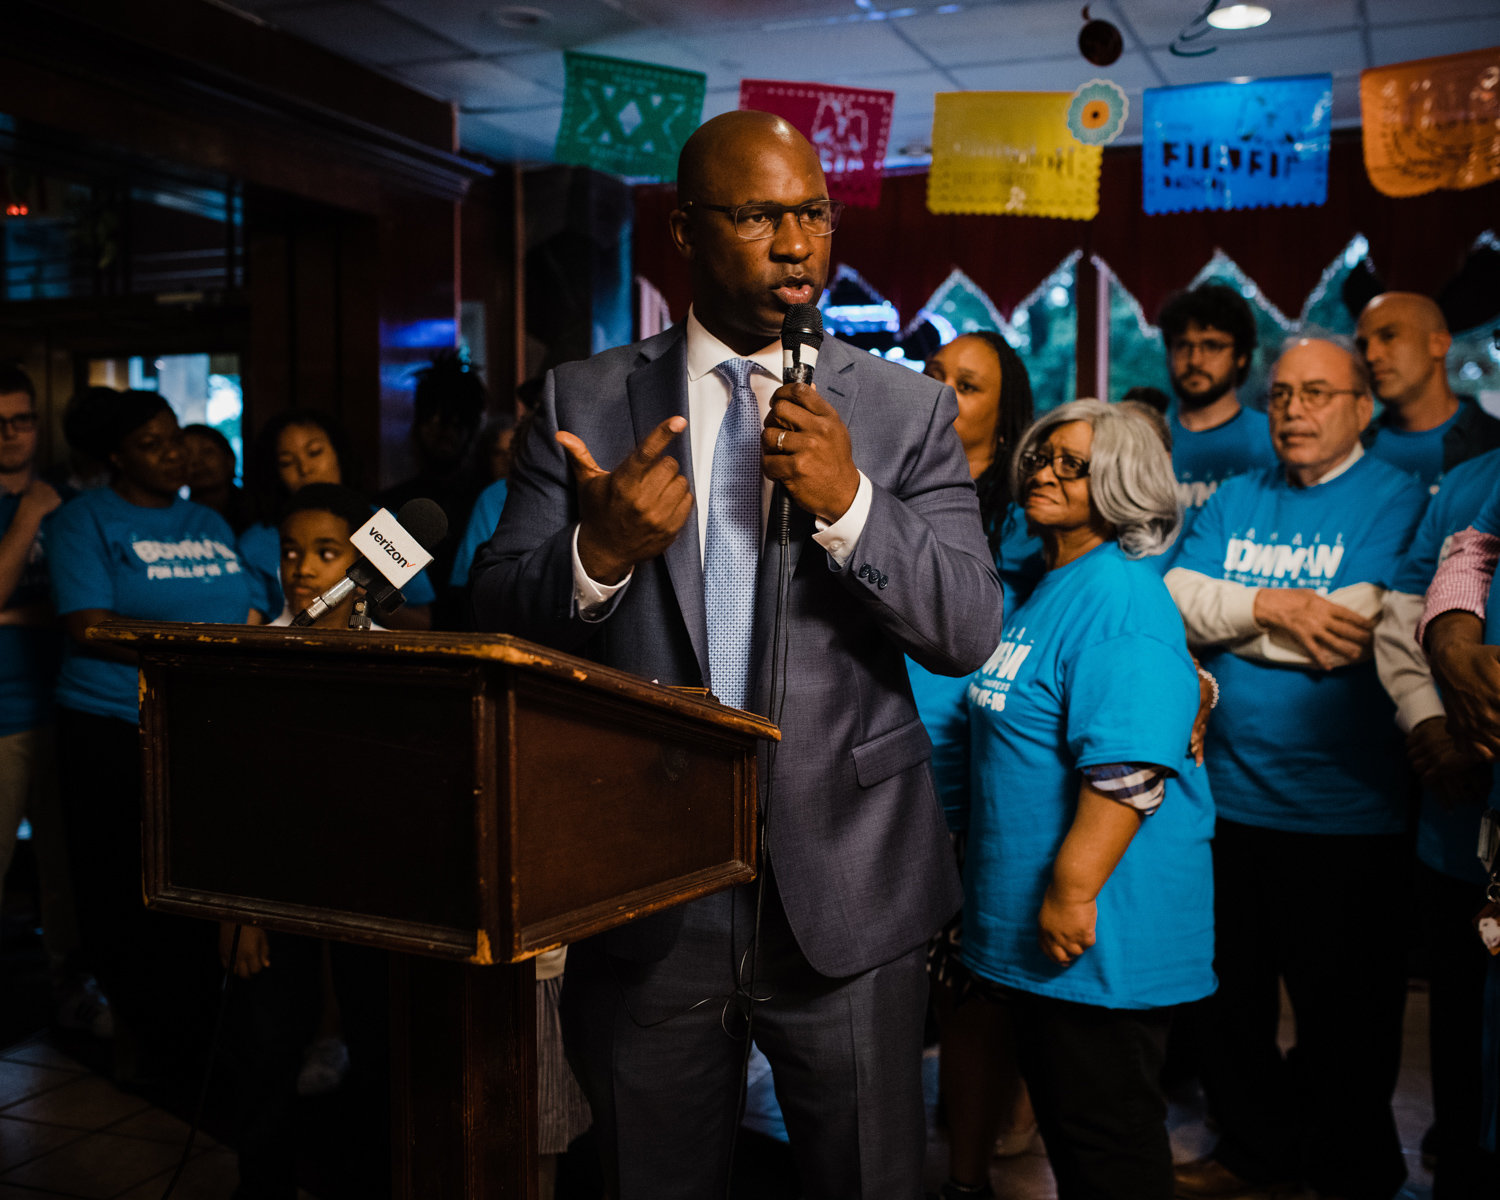 In the time since Jamaal Bowman launched his campaign last year, he has picked up a bevy of key endorsements in his bid to unseat 30-year incumbent, U.S. Rep. Eliot Engel.